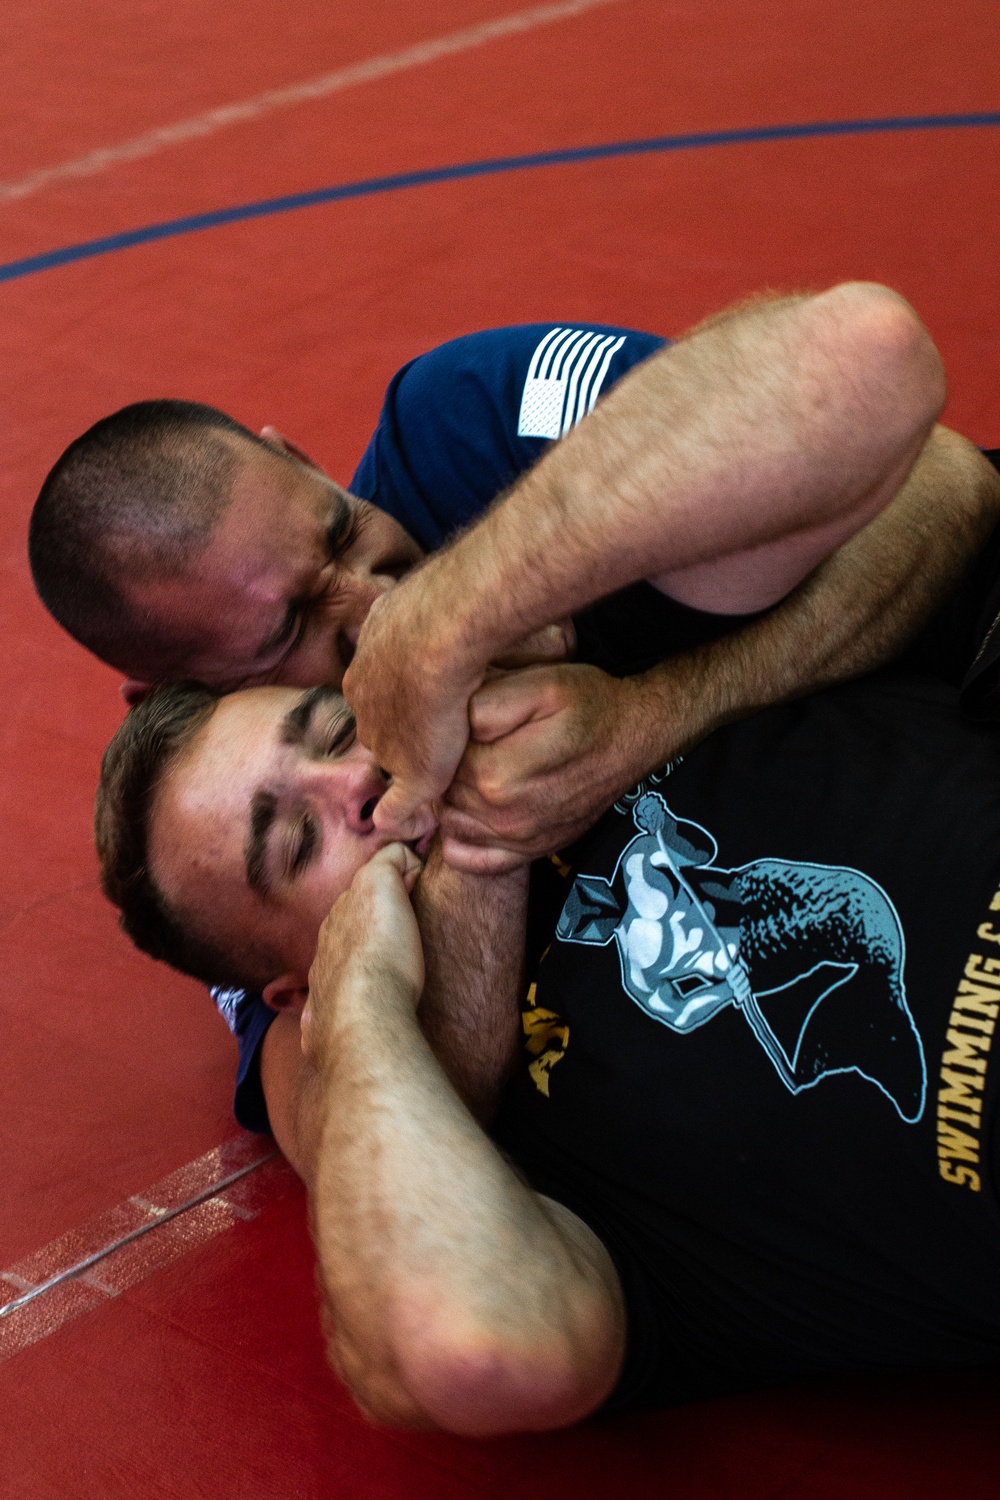 Marines compete in CG’s Cup grappling event